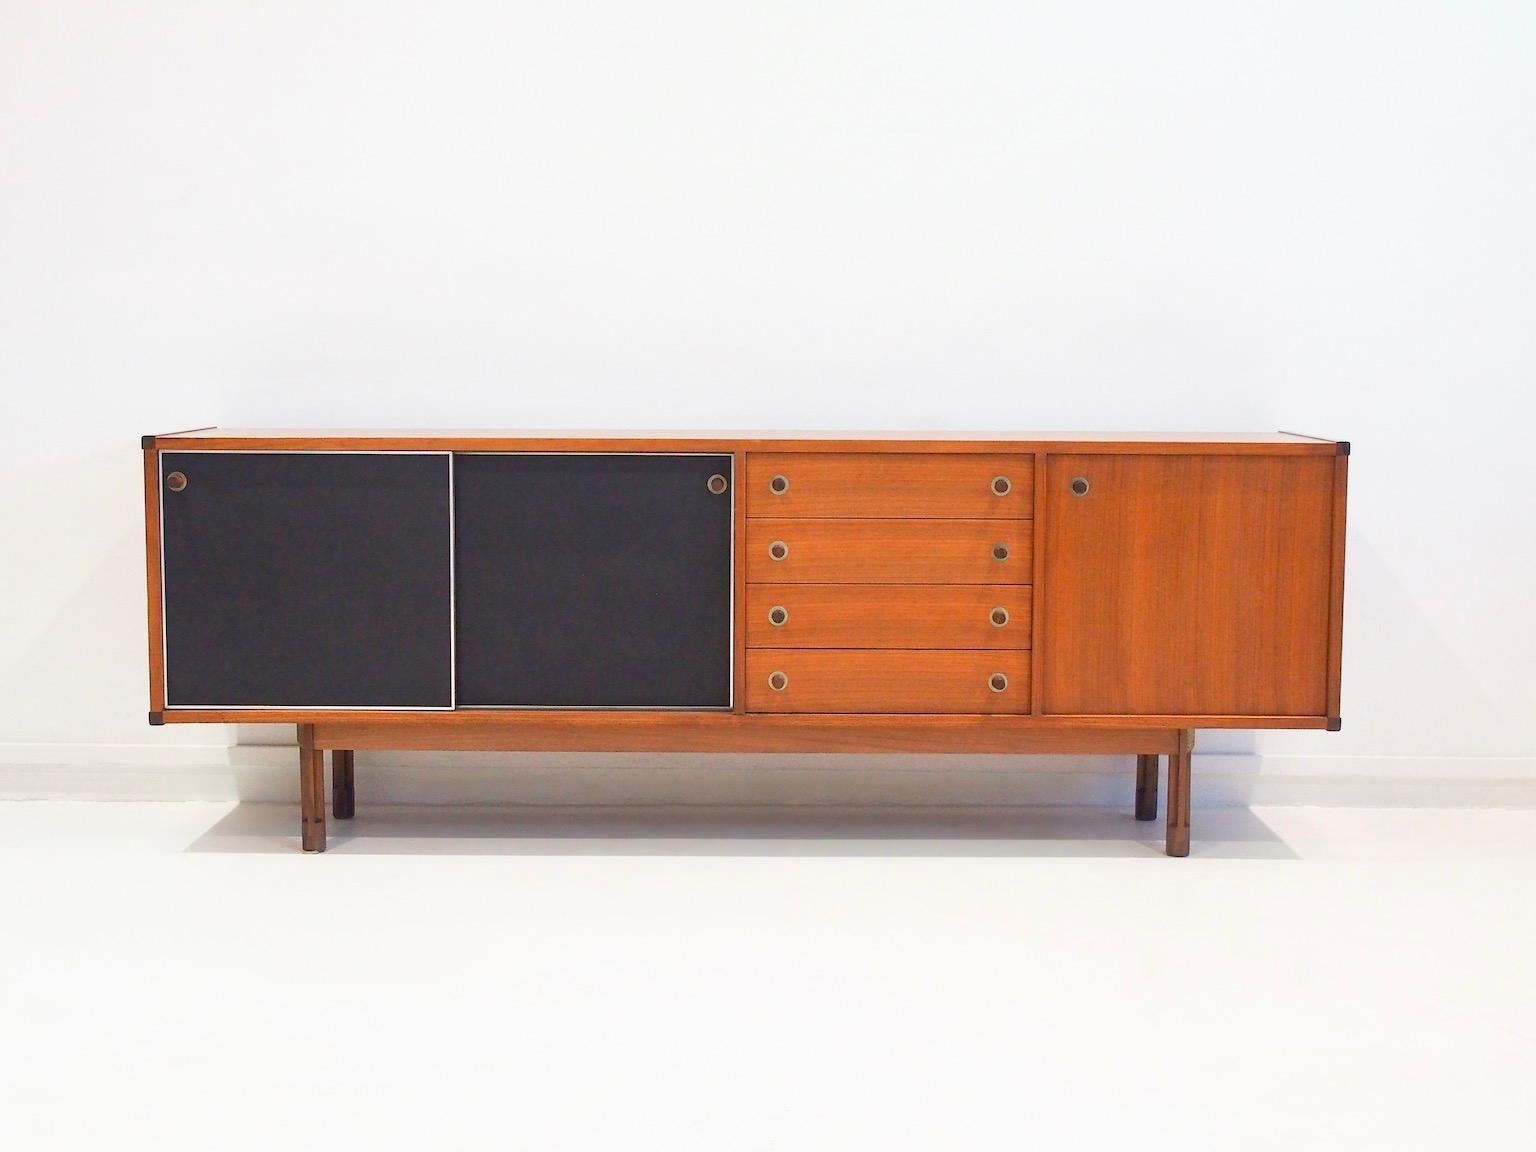 Teak sideboard from the '60s designed by George Coslin. Front with two black leatherette covered sliding doors, four drawers with felt interior and a smaller storage place with a shelf on the right. The doors and drawers are positioned slightly